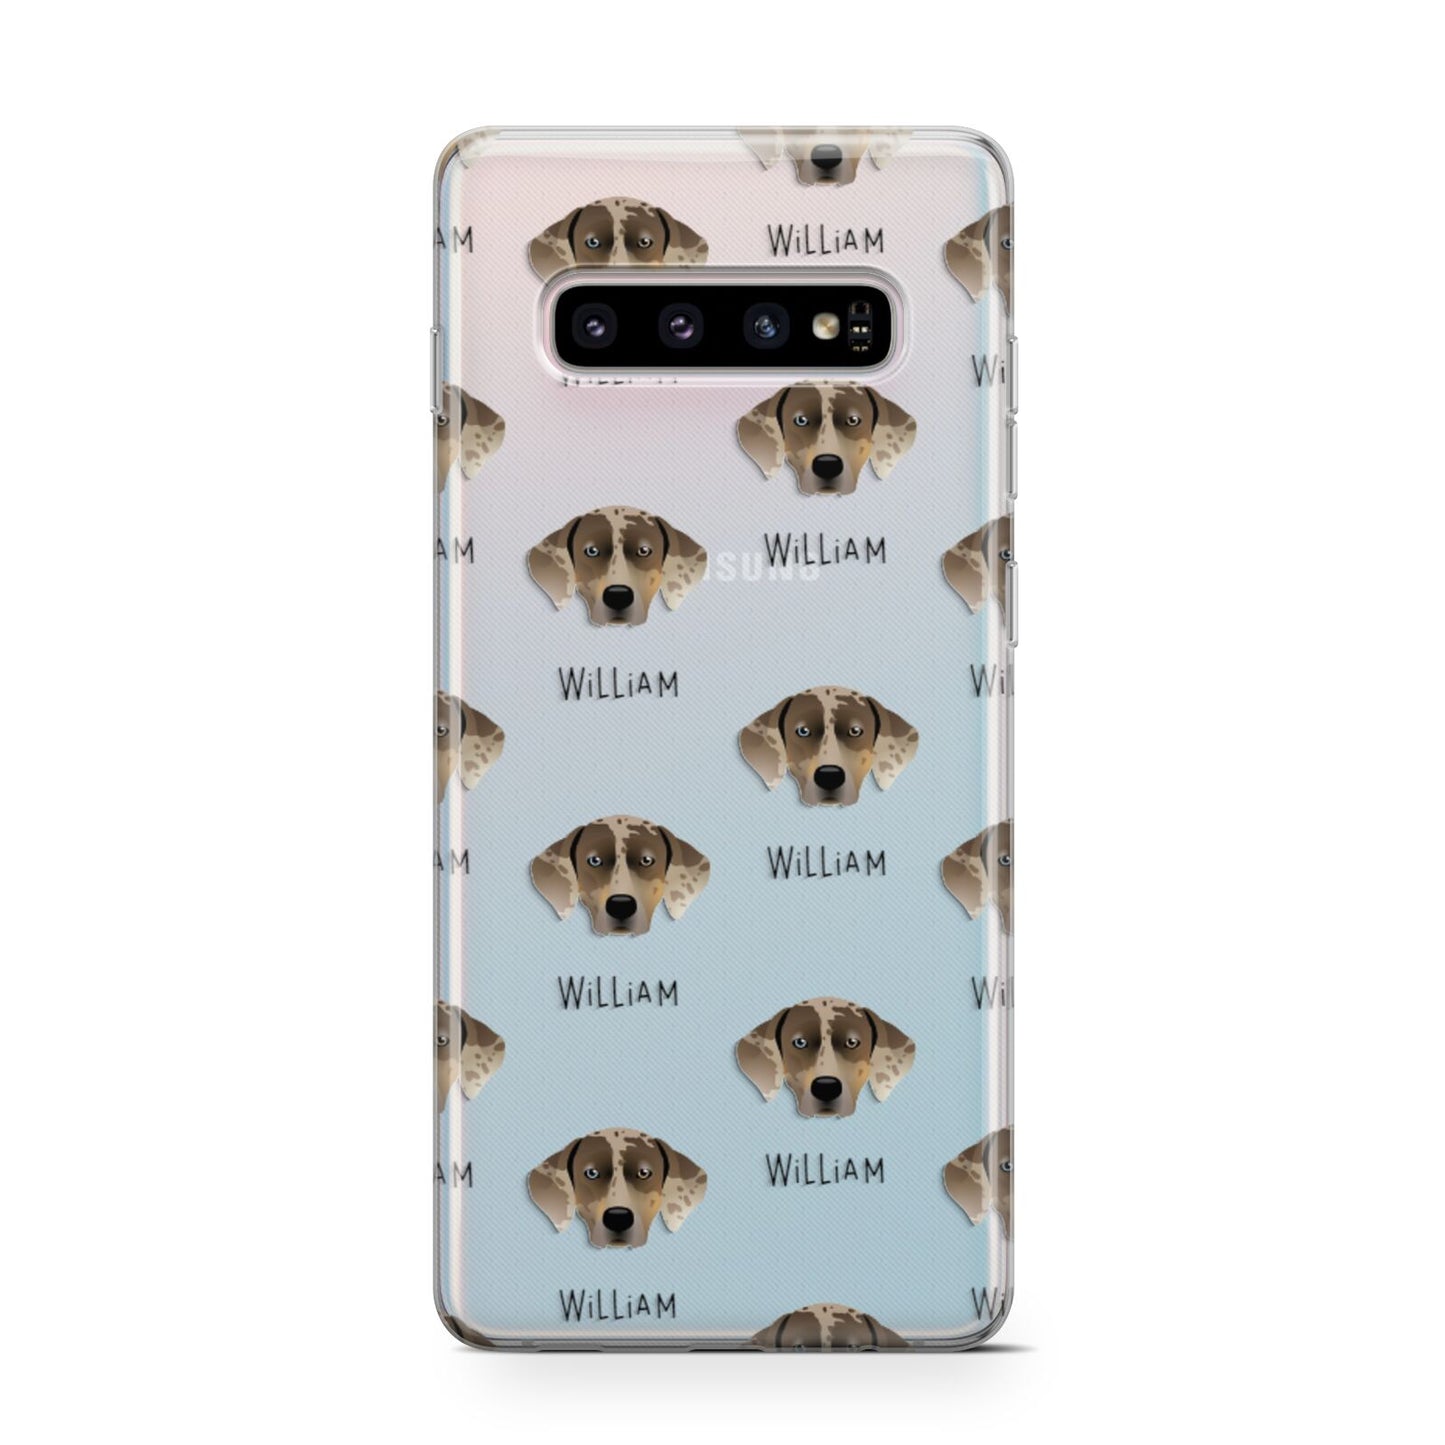 Catahoula Leopard Dog Icon with Name Samsung Galaxy S10 Case